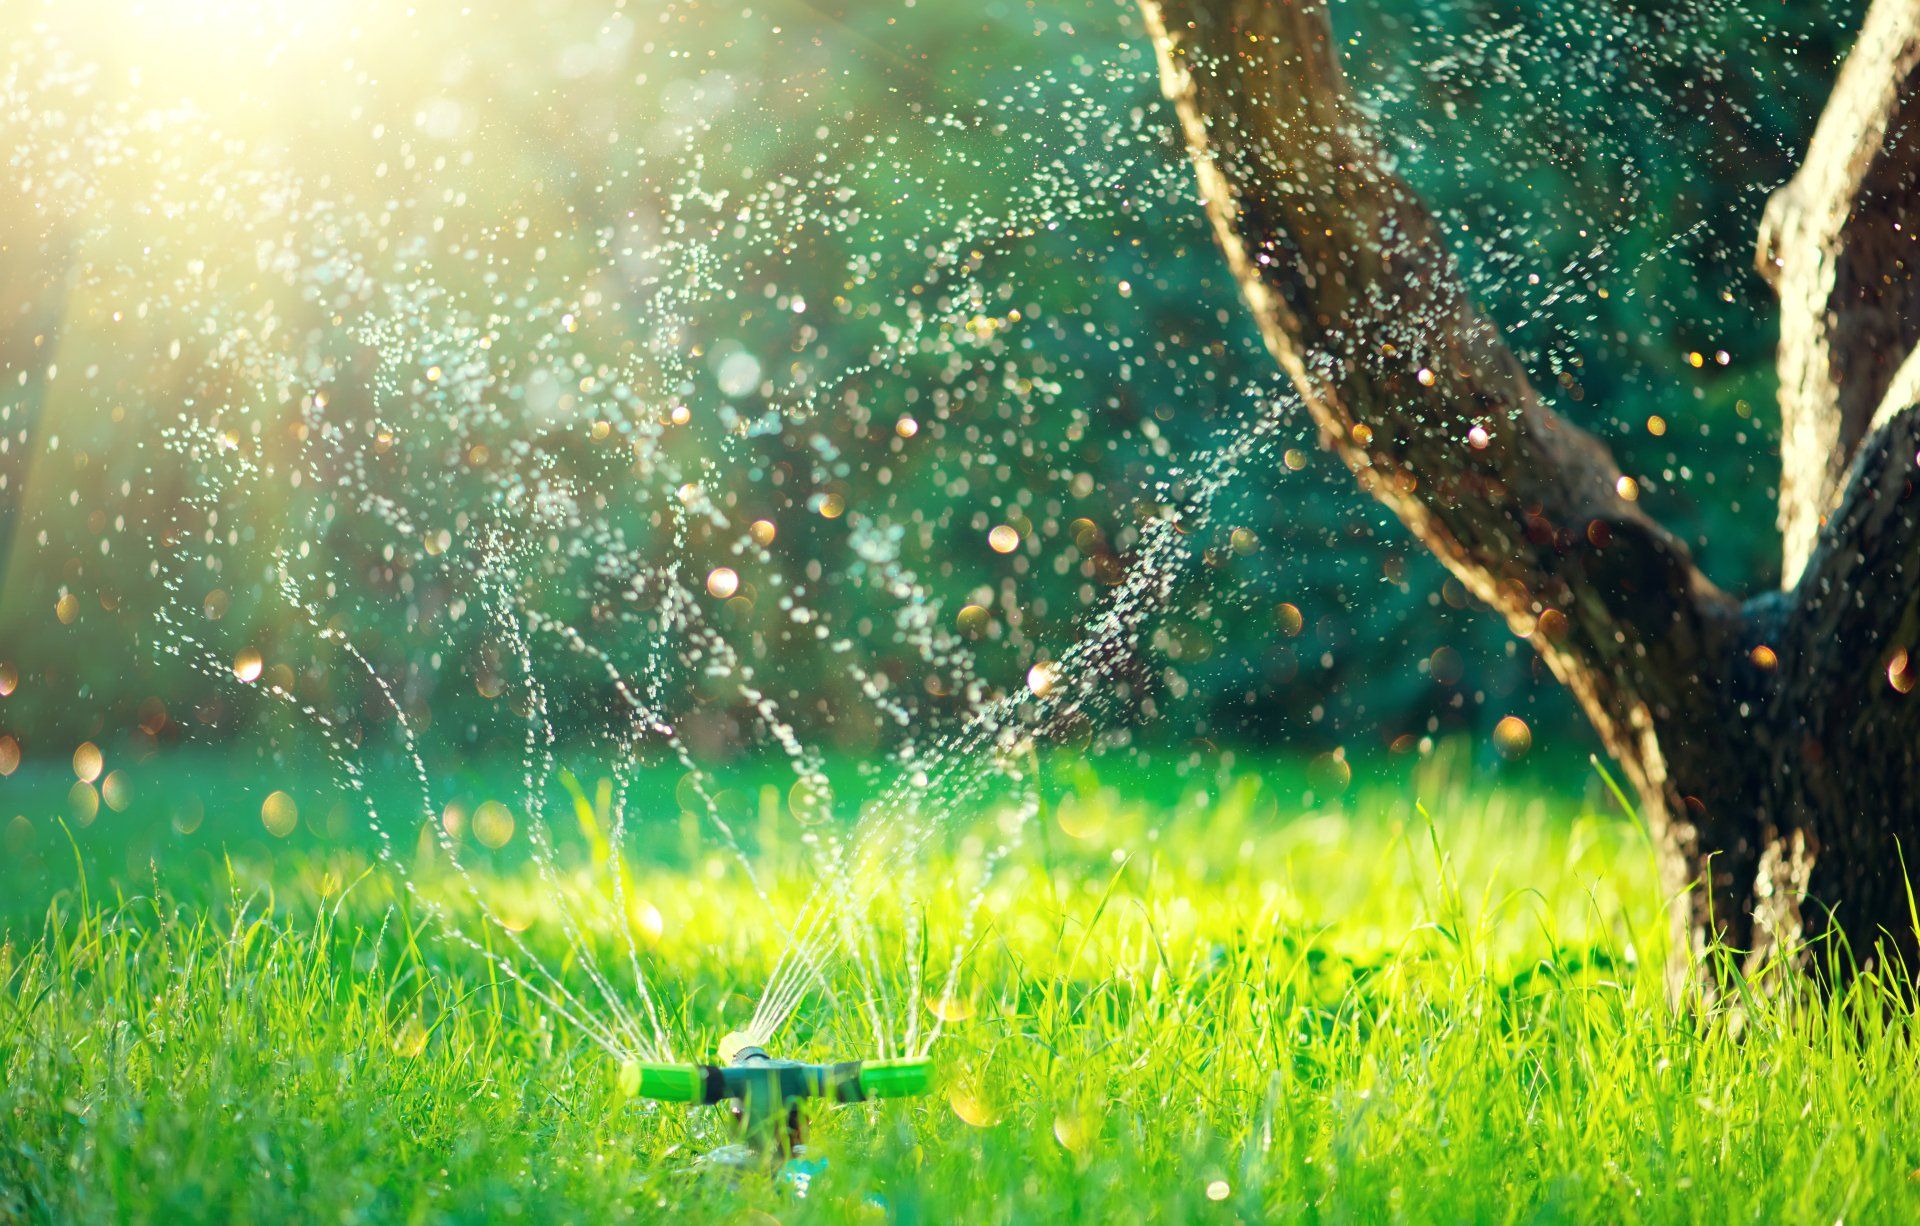 Smart garden activated with full automatic sprinkler irrigation system working in a green park